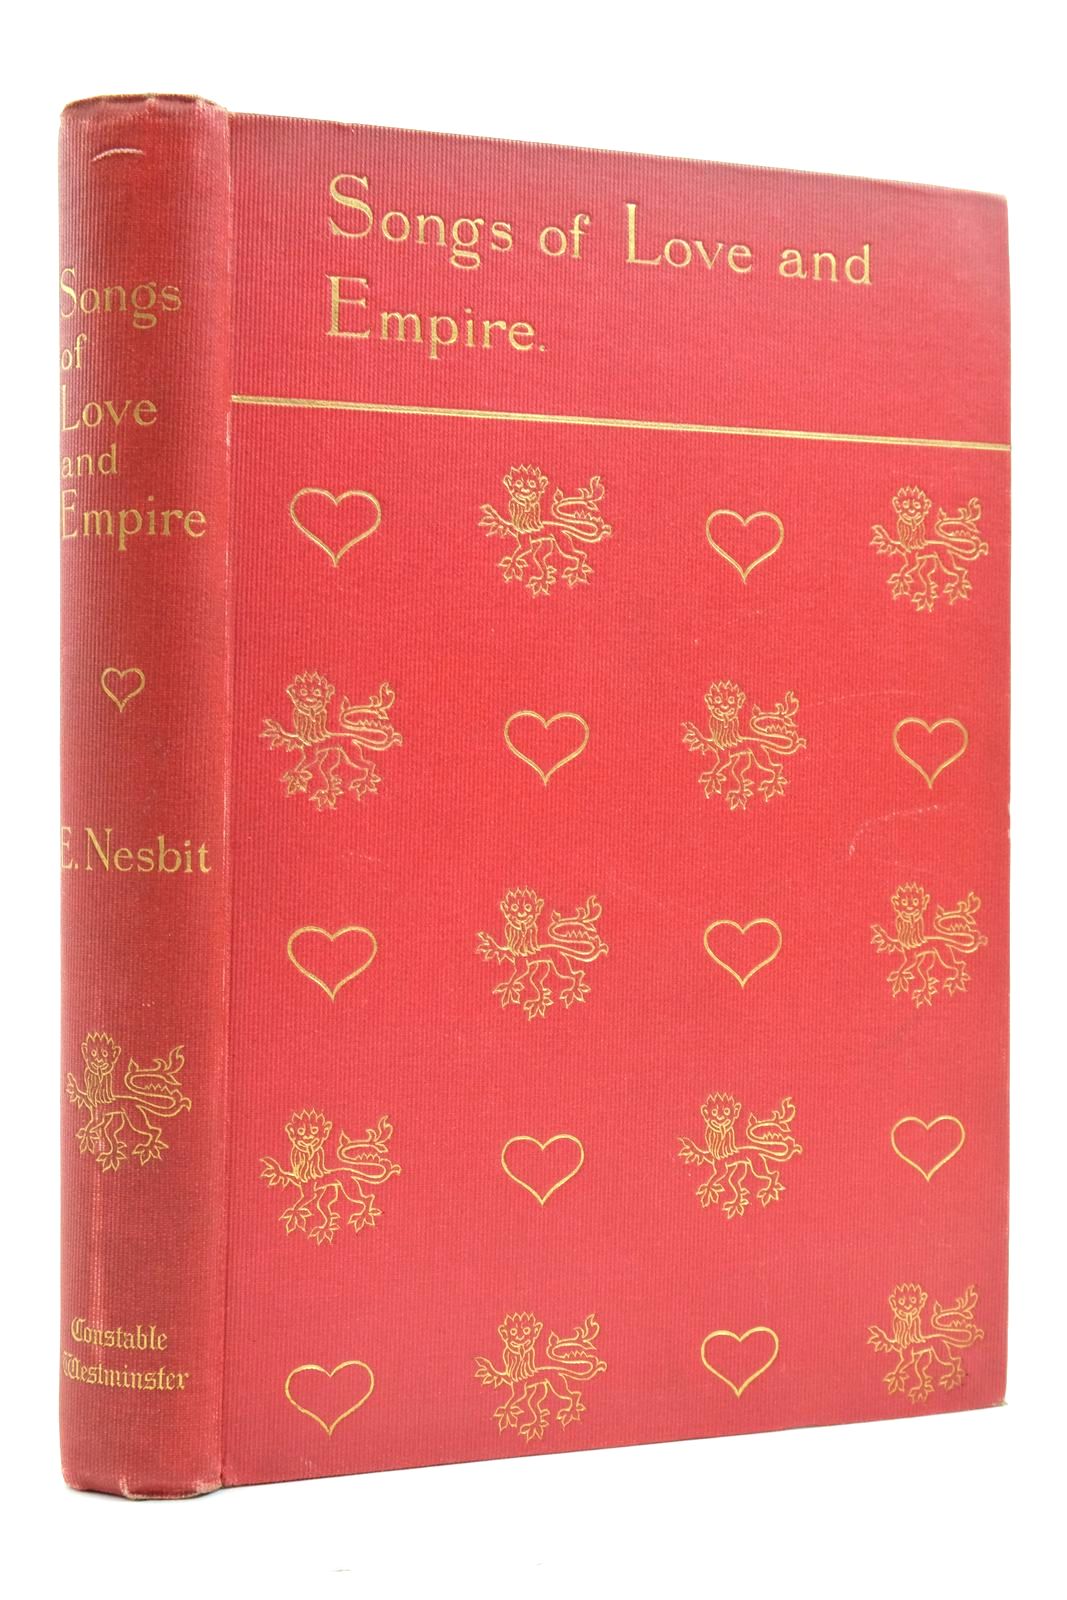 Photo of SONGS OF LOVE AND EMPIRE written by Nesbit, E. published by Archibald Constable And Co. (STOCK CODE: 2138005)  for sale by Stella & Rose's Books